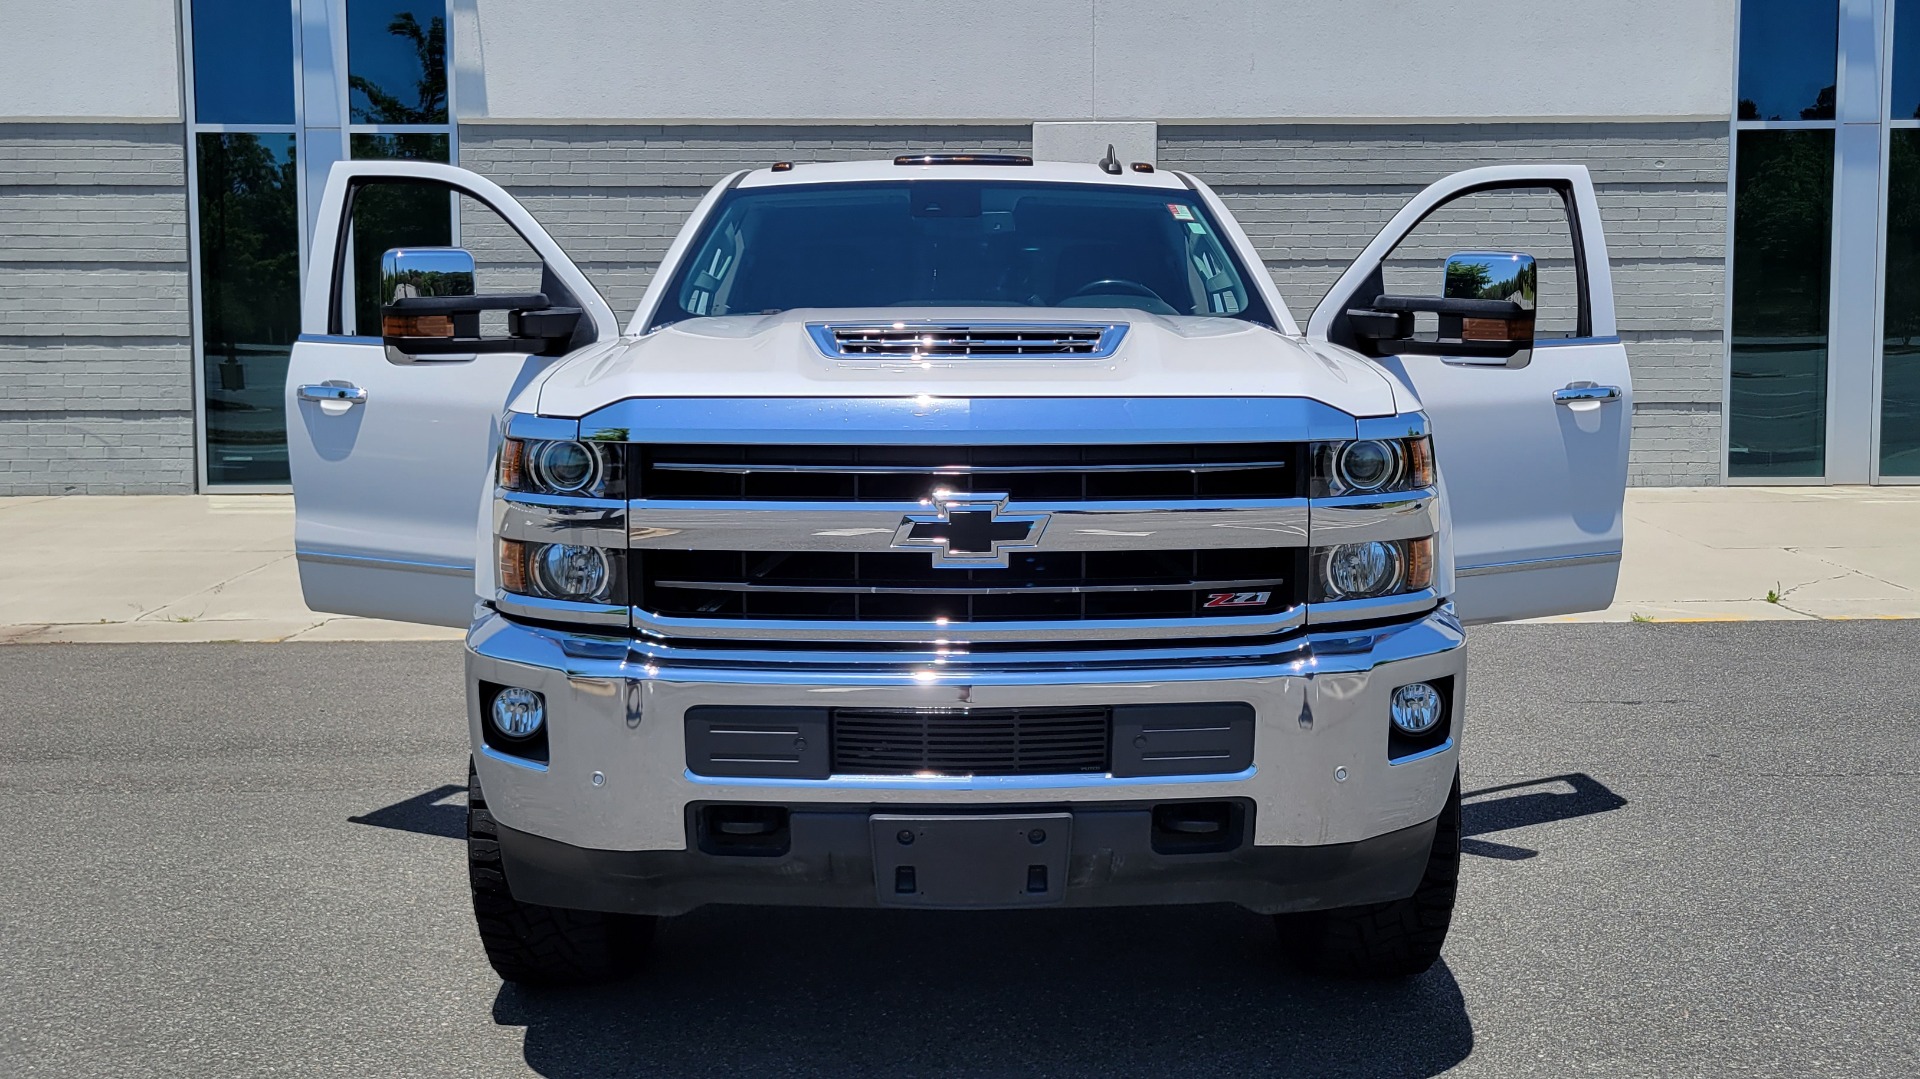 Used 2018 Chevrolet SILVERADO 2500HD LTZ CREWCAB / 6.6L / NAV / SUNROOF / BOSE / 5TH WHL / REARVIEW for sale Sold at Formula Imports in Charlotte NC 28227 14